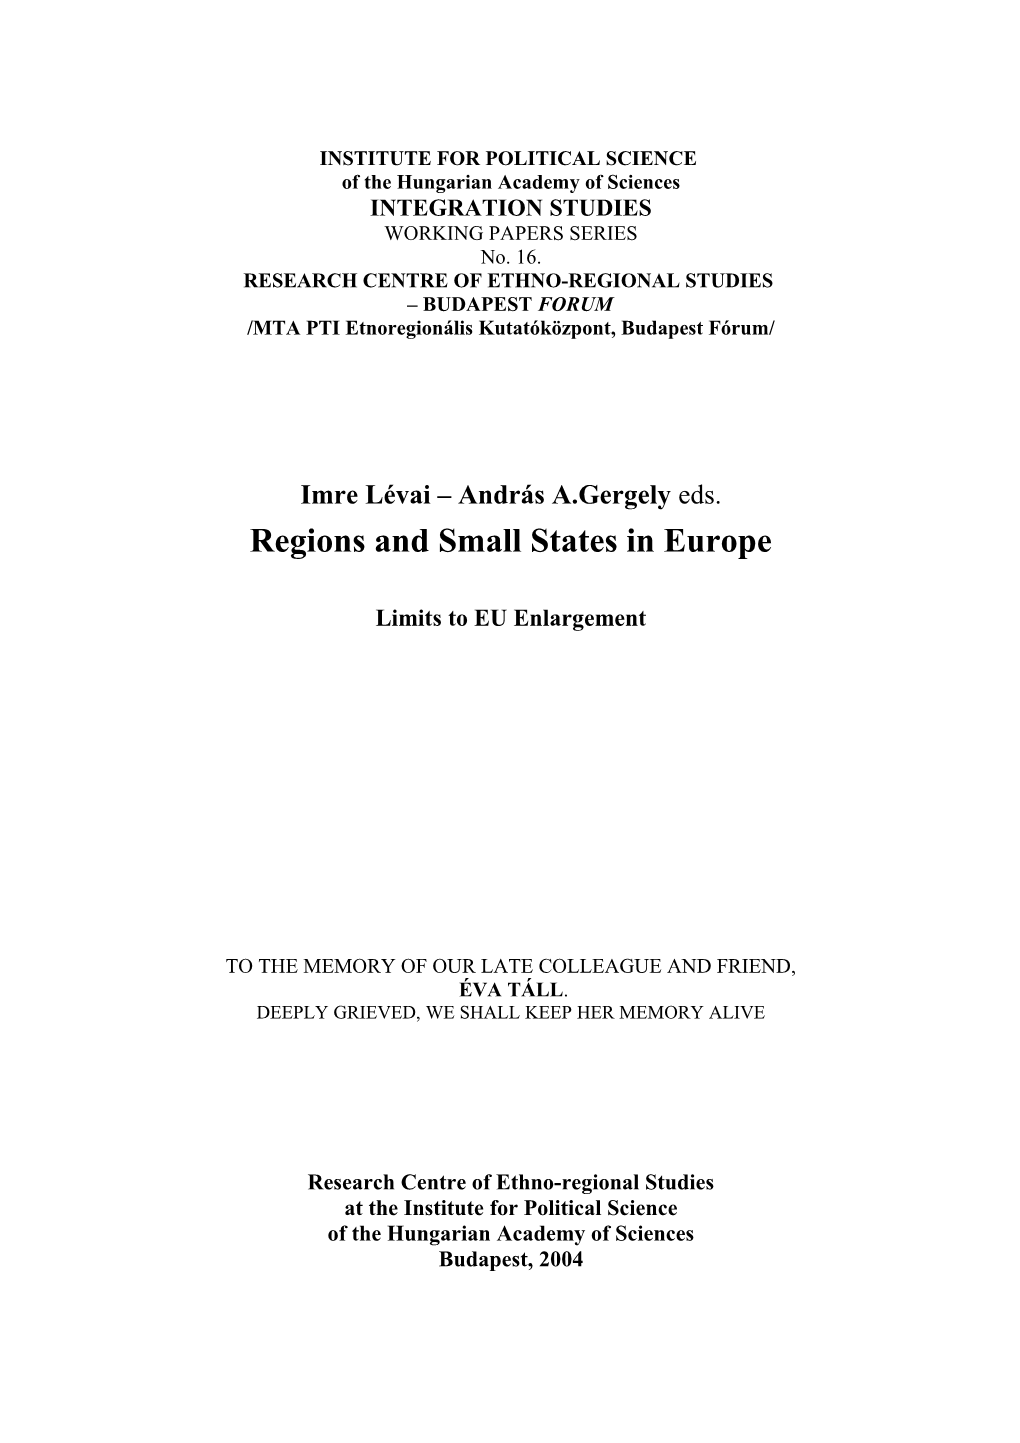 Regions and Small States in Europe